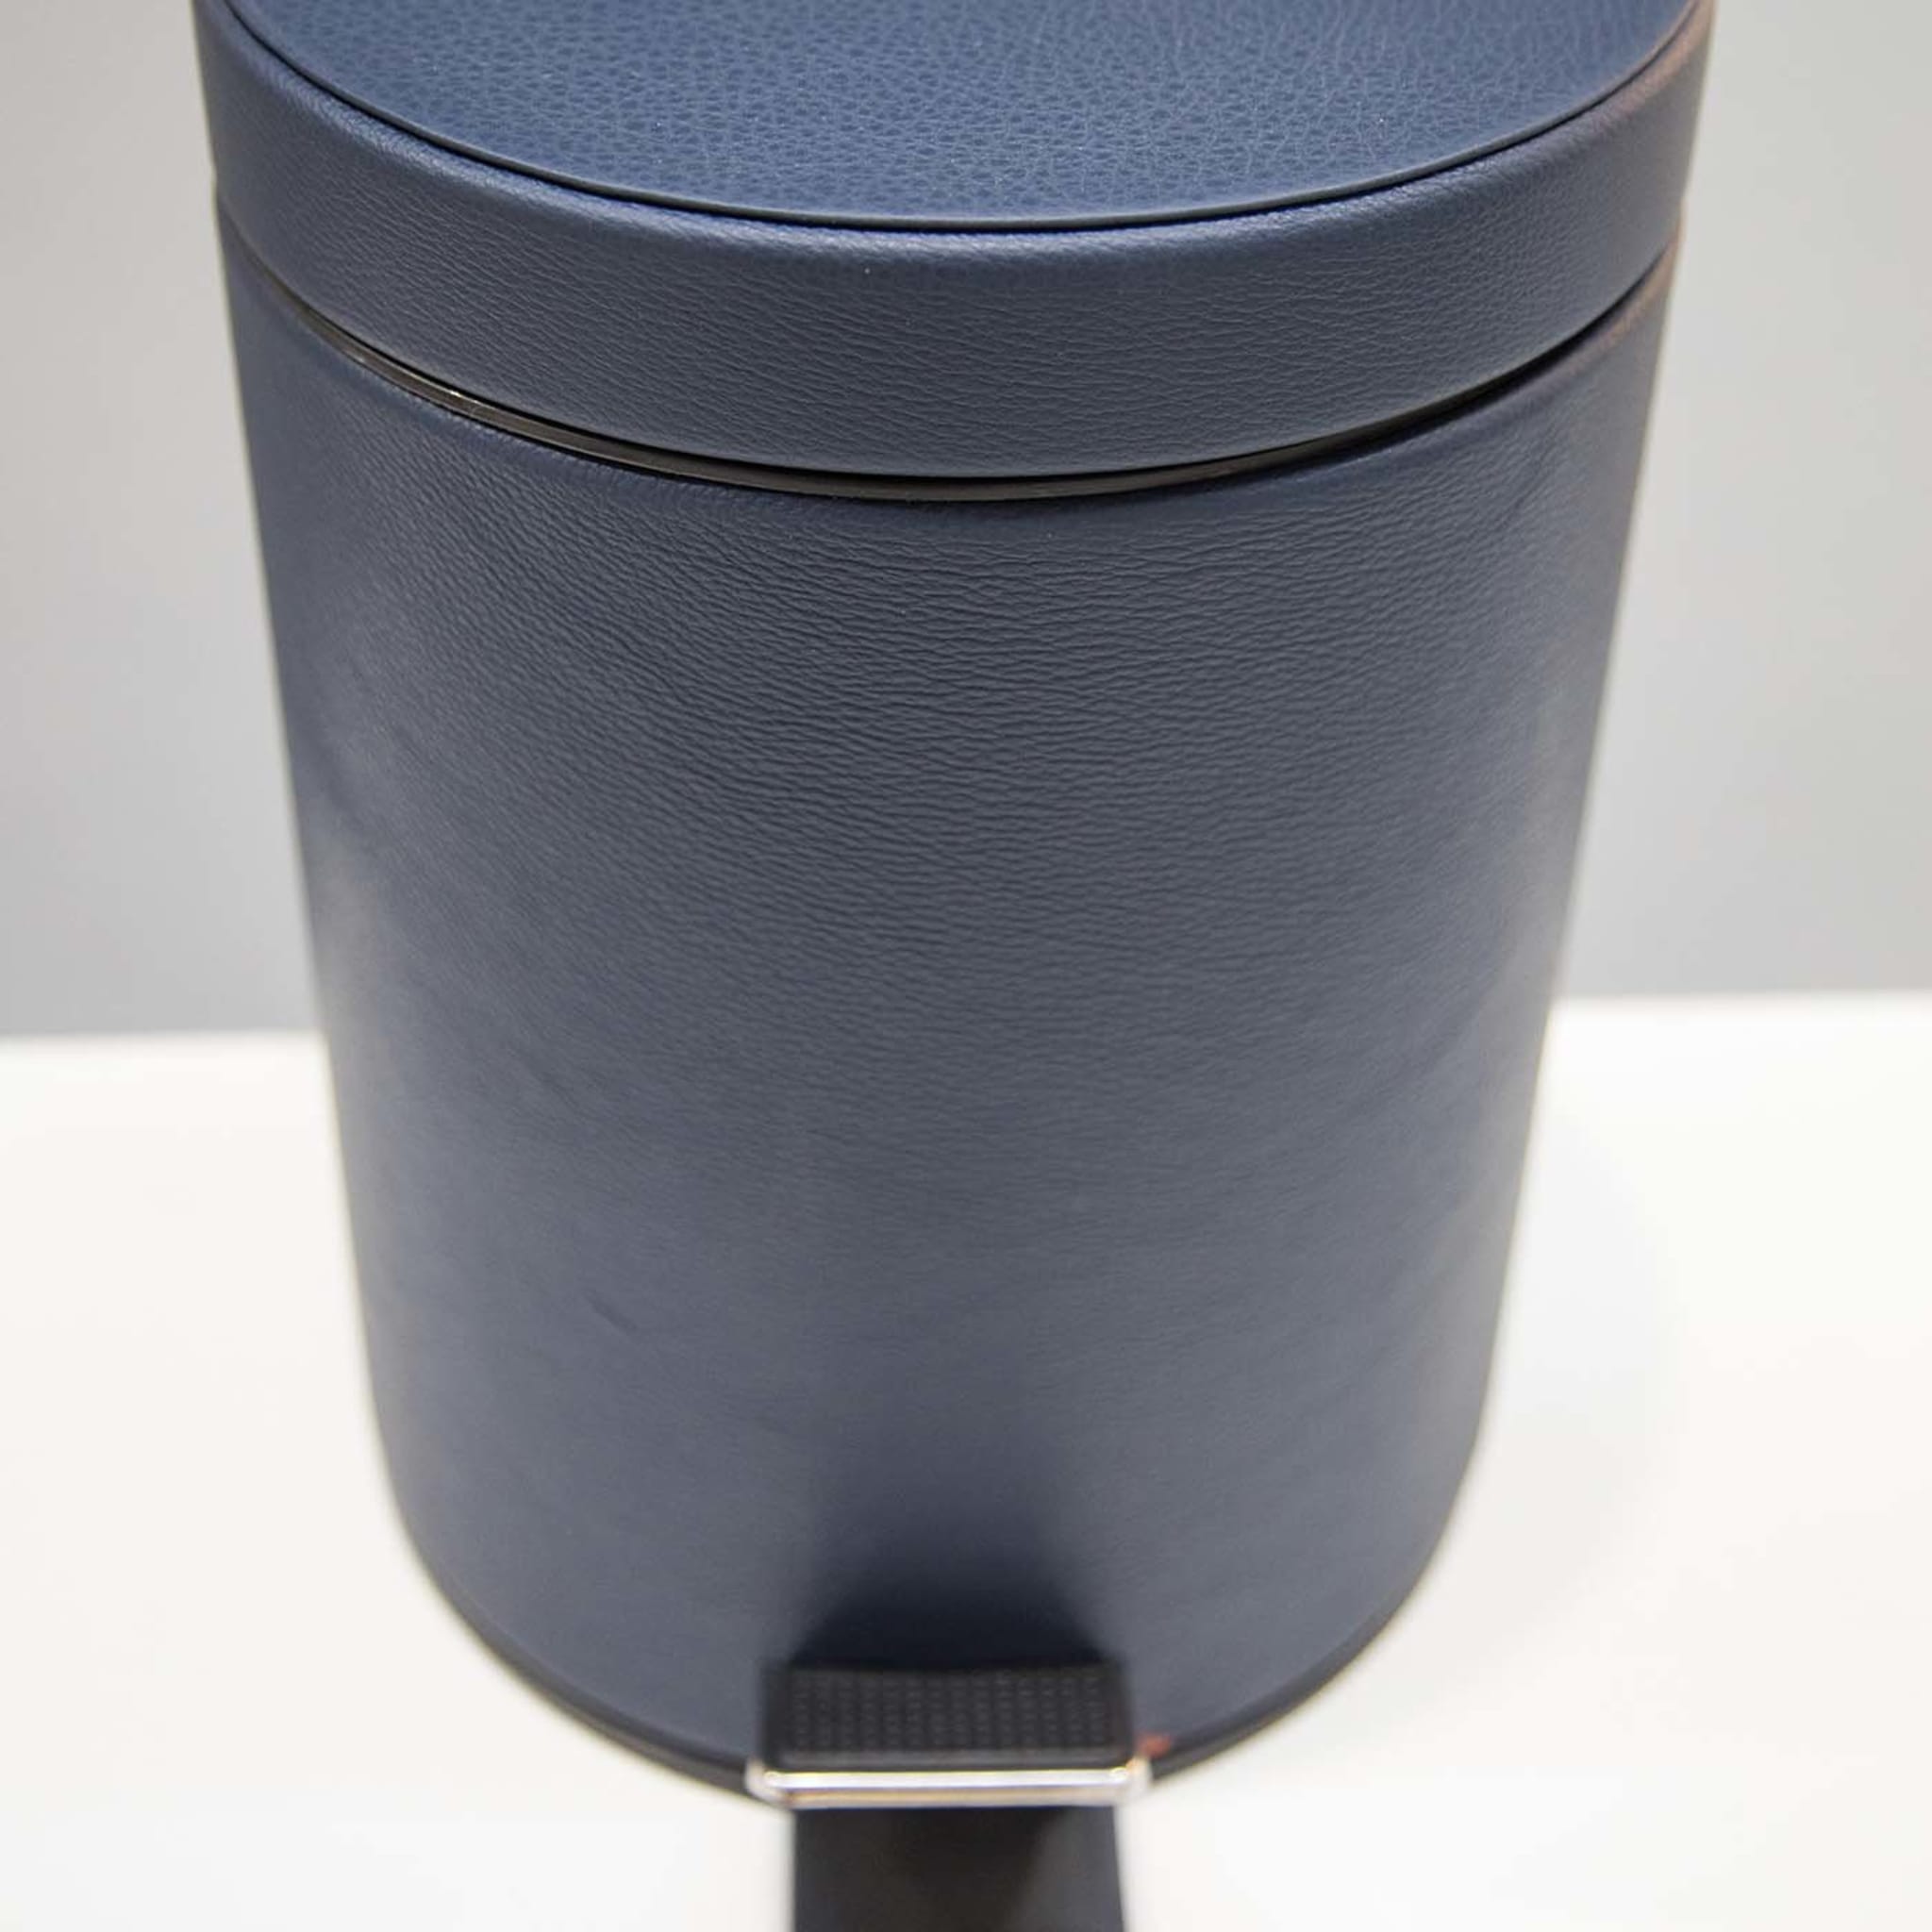 Leather Bin with Lid in Blue - Alternative view 1